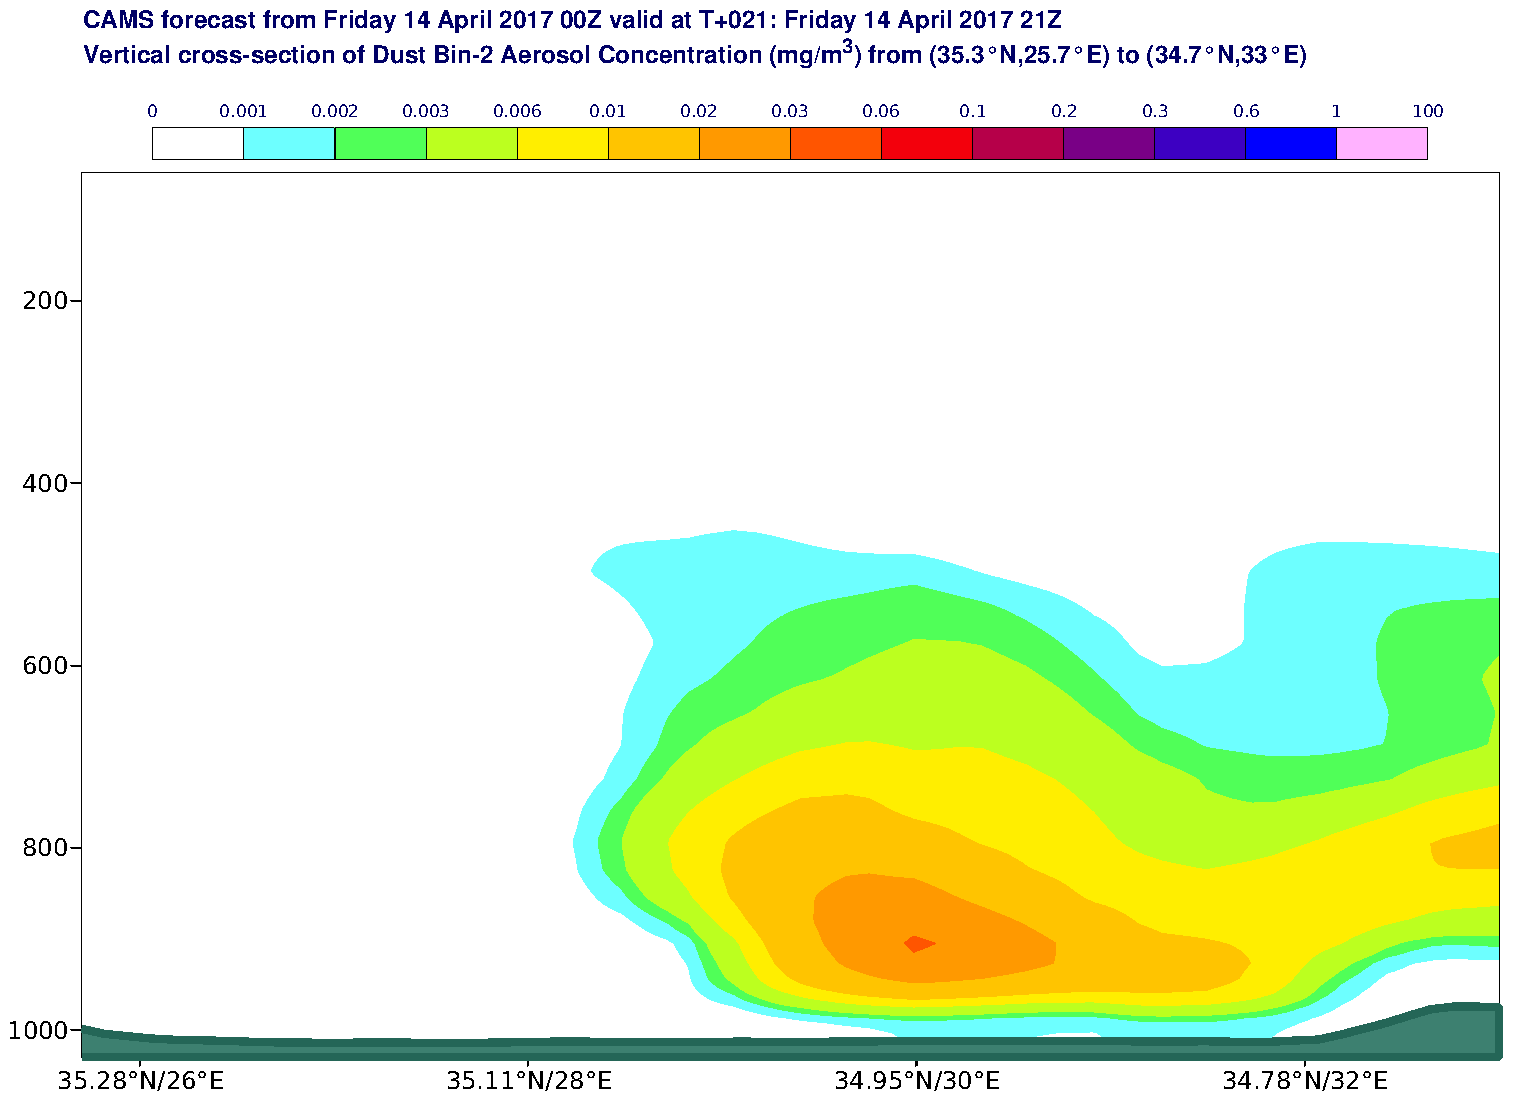 Vertical cross-section of Dust Bin-2 Aerosol Concentration (mg/m3) valid at T21 - 2017-04-14 21:00